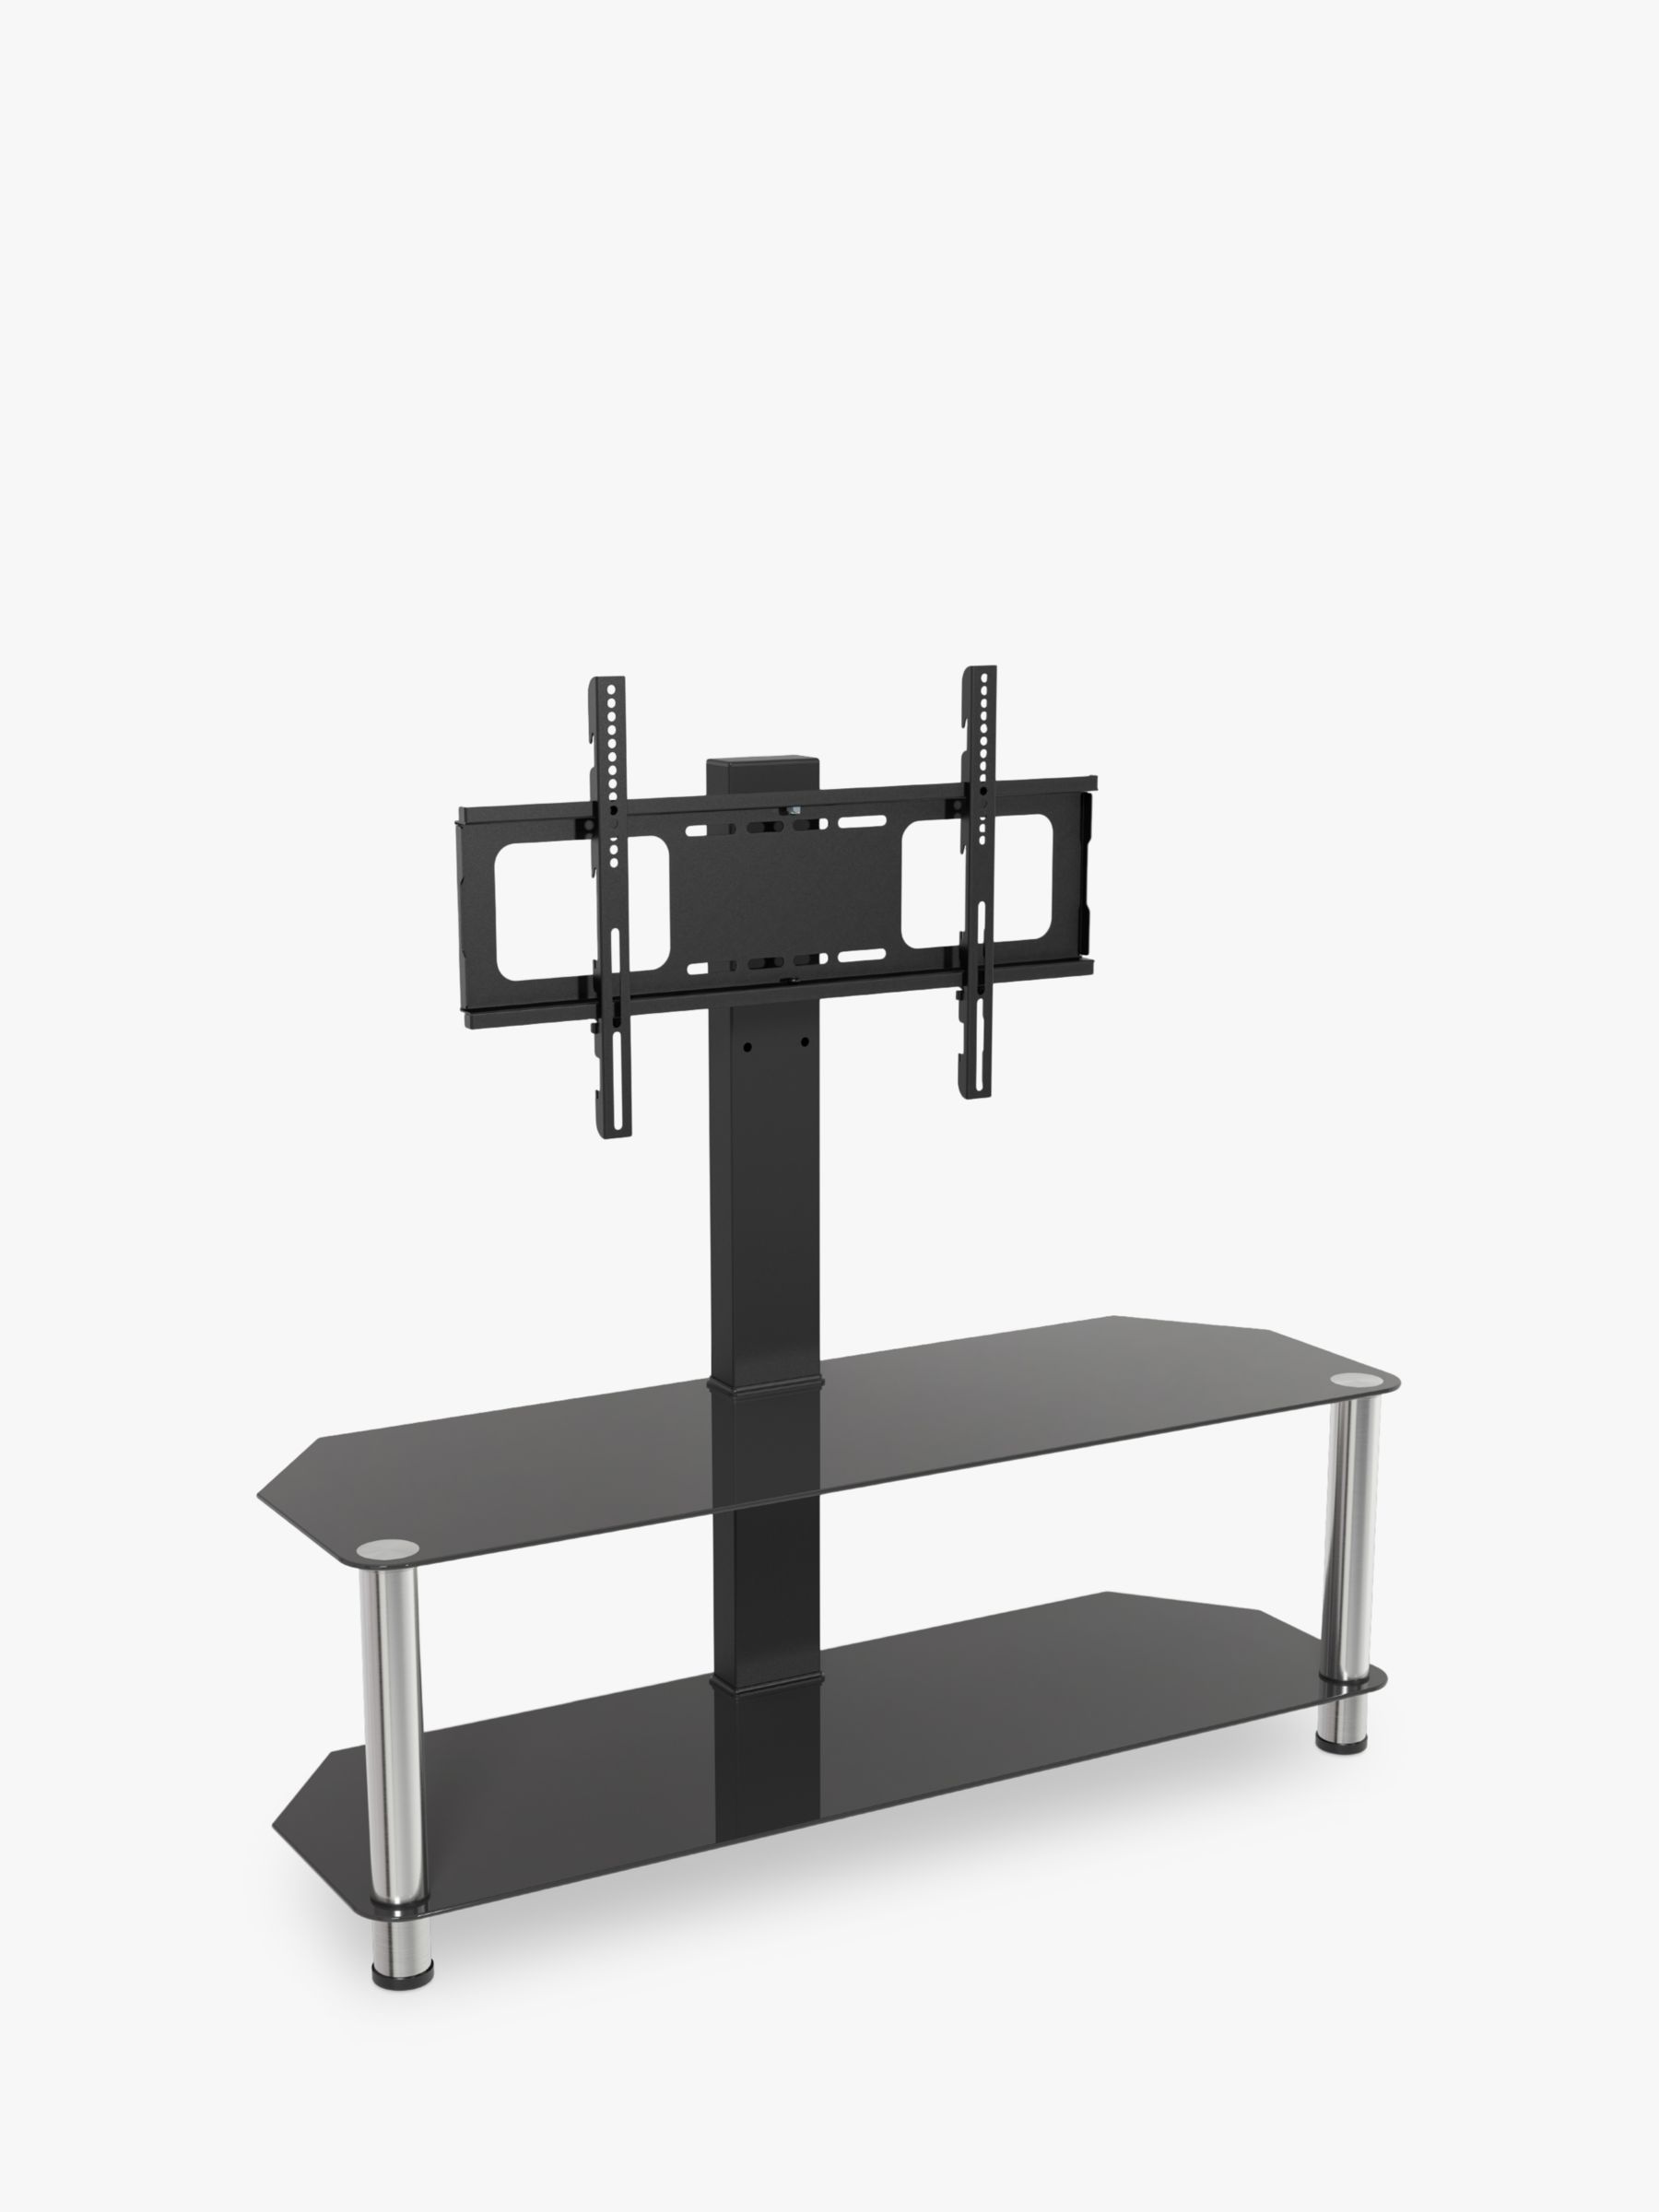 Photo of Avf sdcl1140 corner tv stand with mount for tvs up to 65” black/chrome